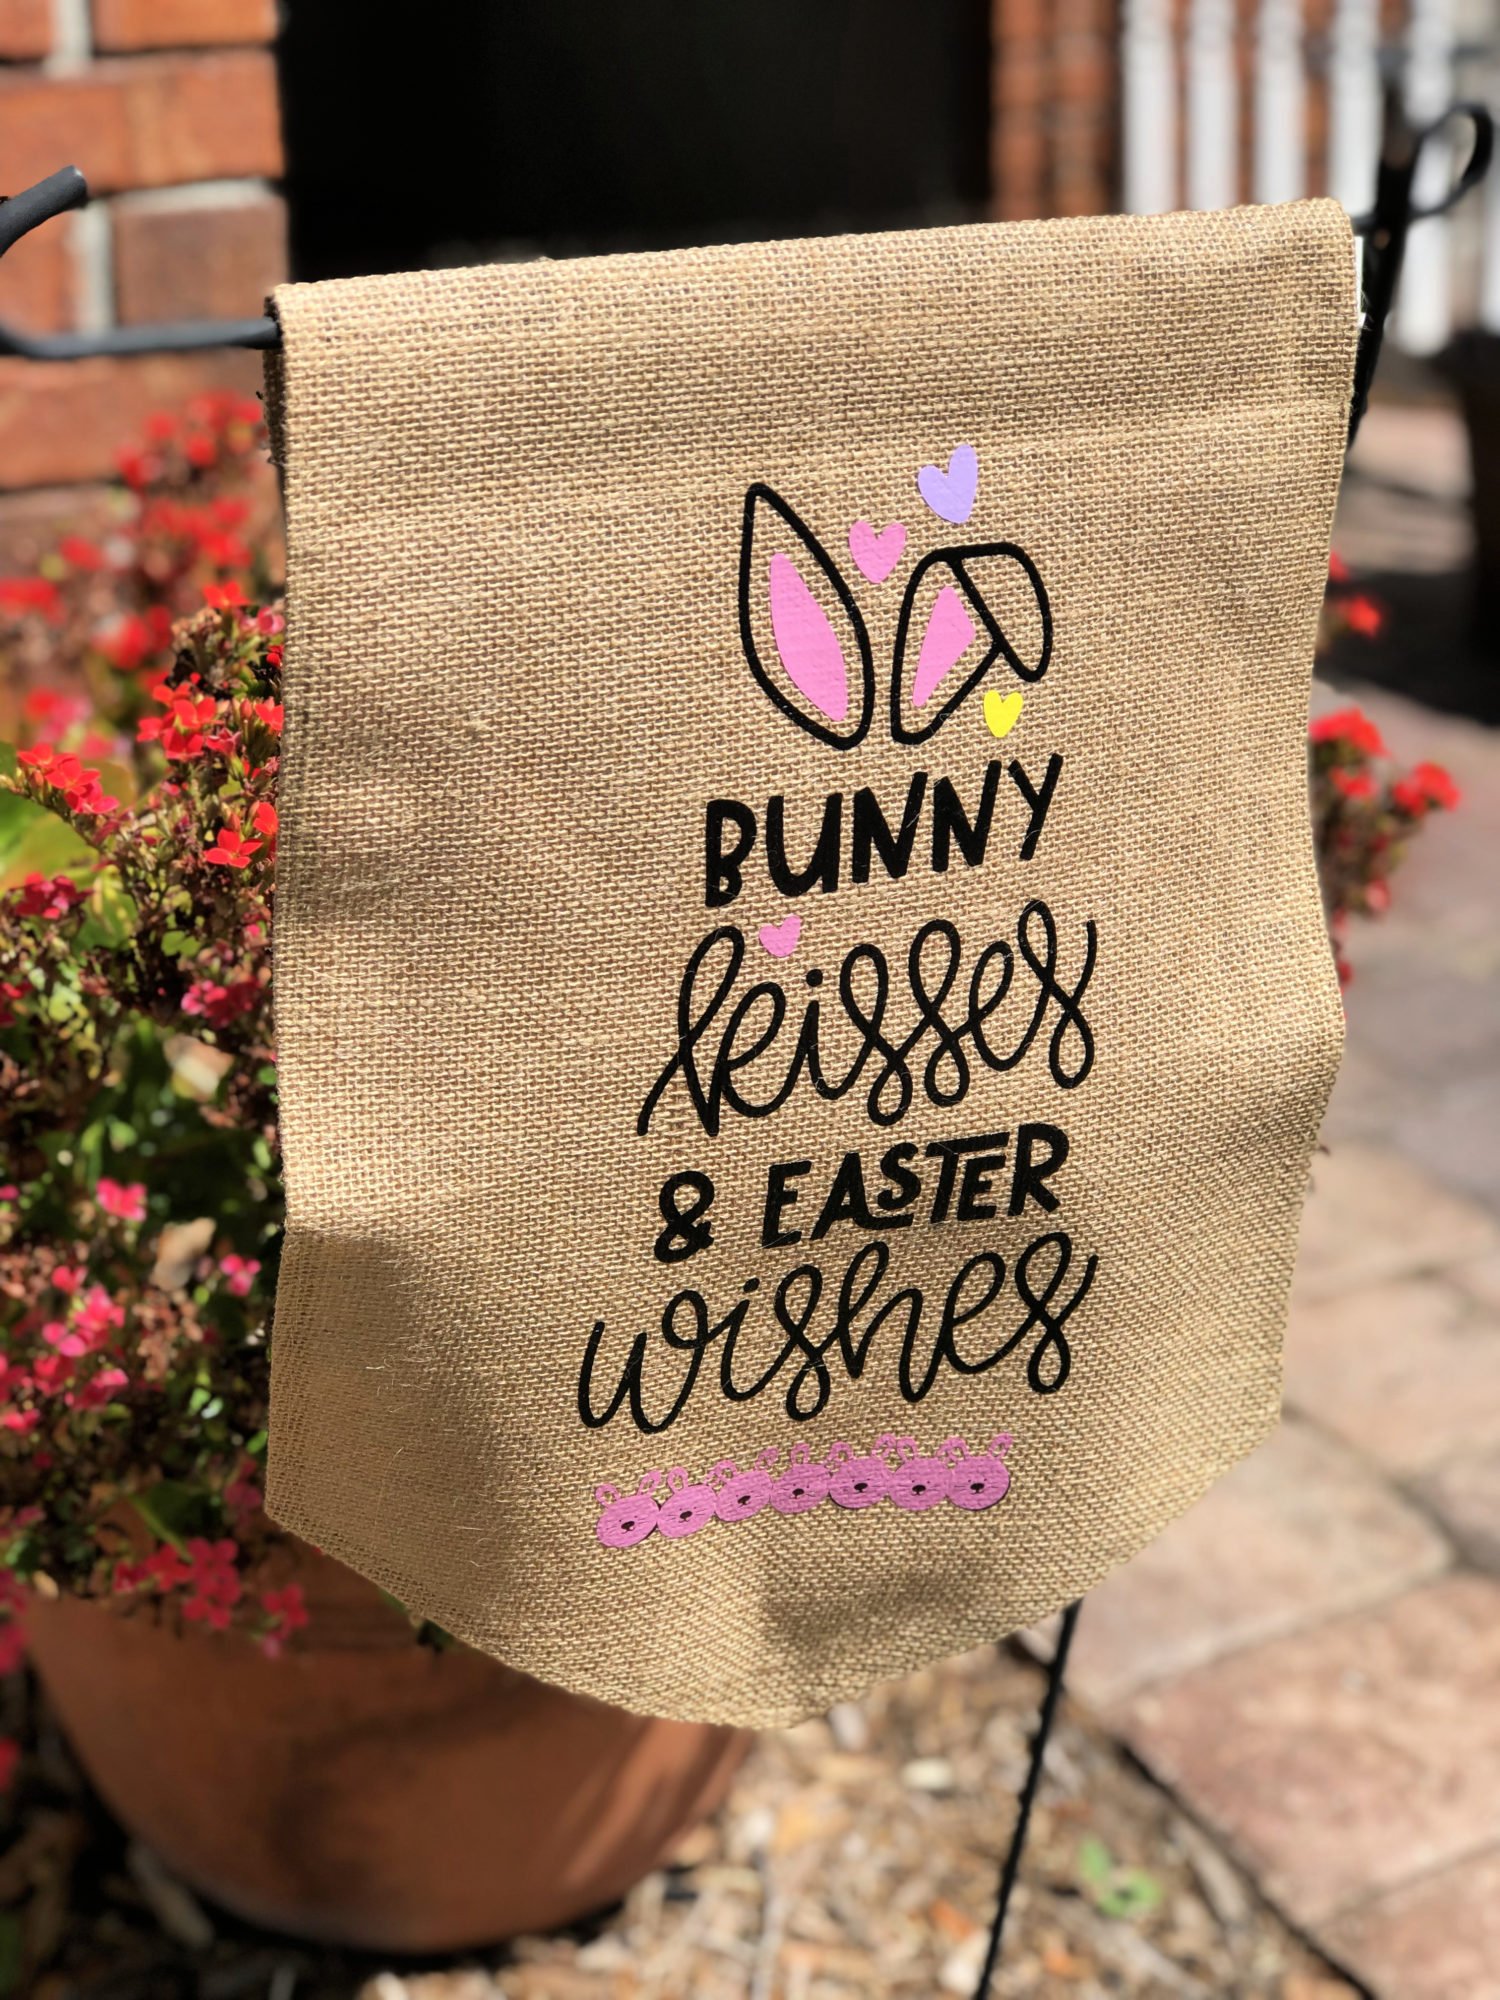 Bunny Kisses & Easter Wishes Burlap Garden Flag - Sew Woodsy